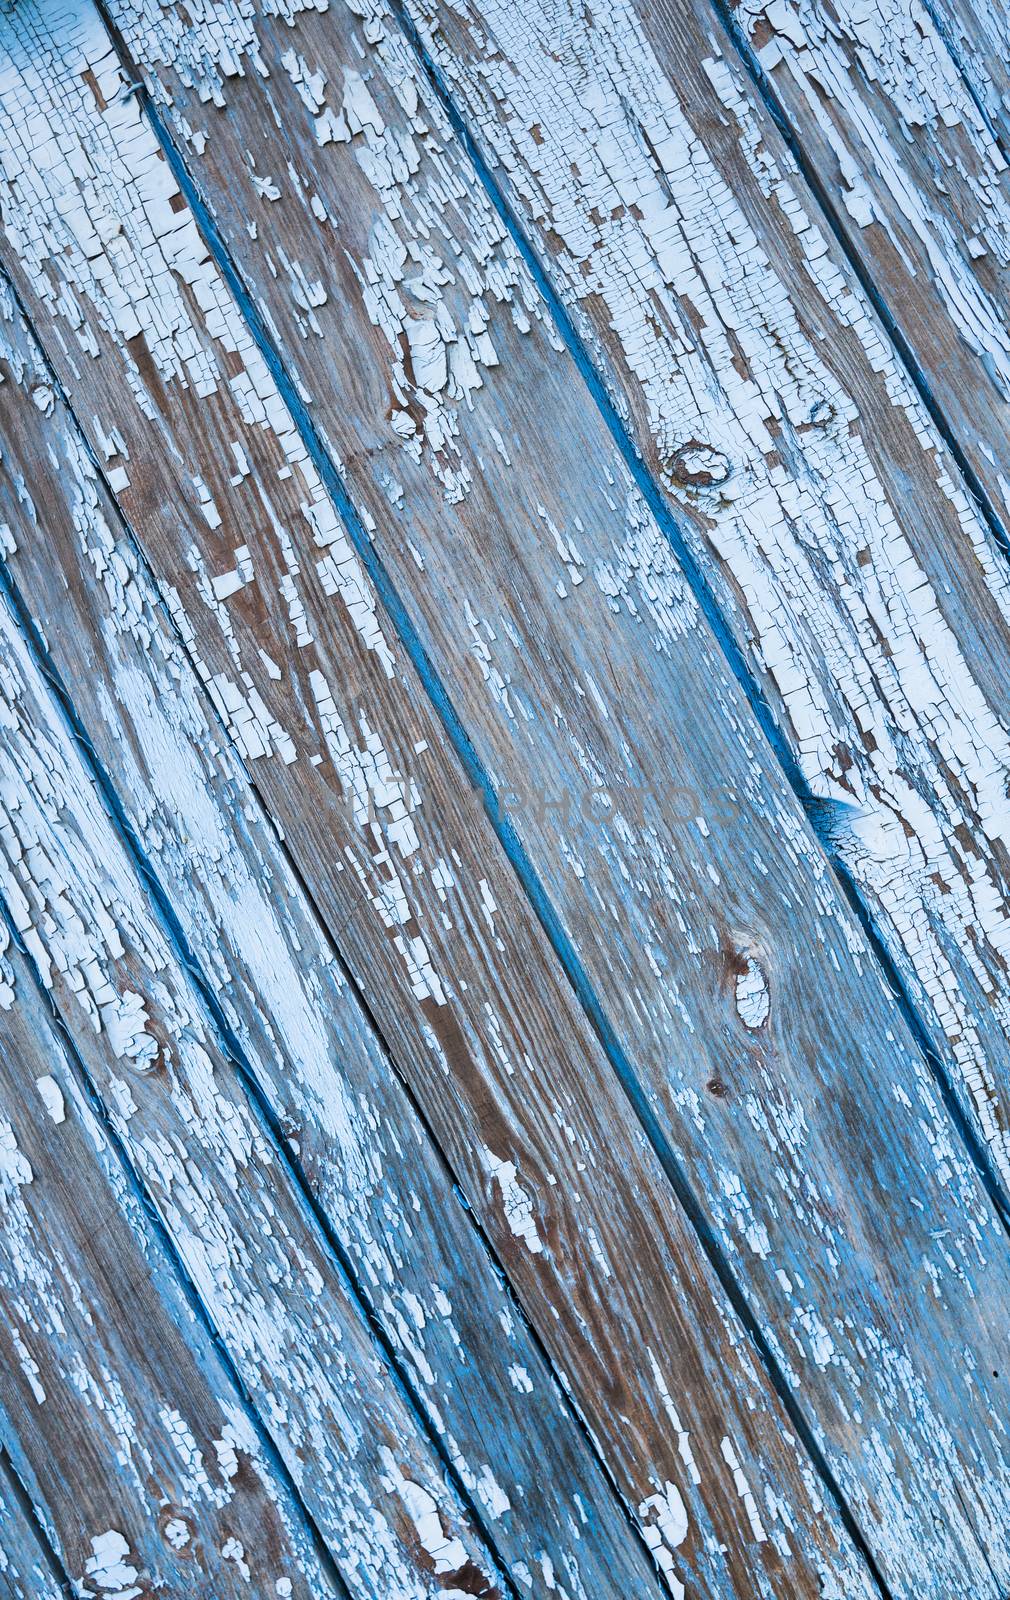 Old painted texture vintage wood background with peeling paint. Painted weathered plain teal blue and white Rustic Wood Board Back ground that can be either horizontal or vertical